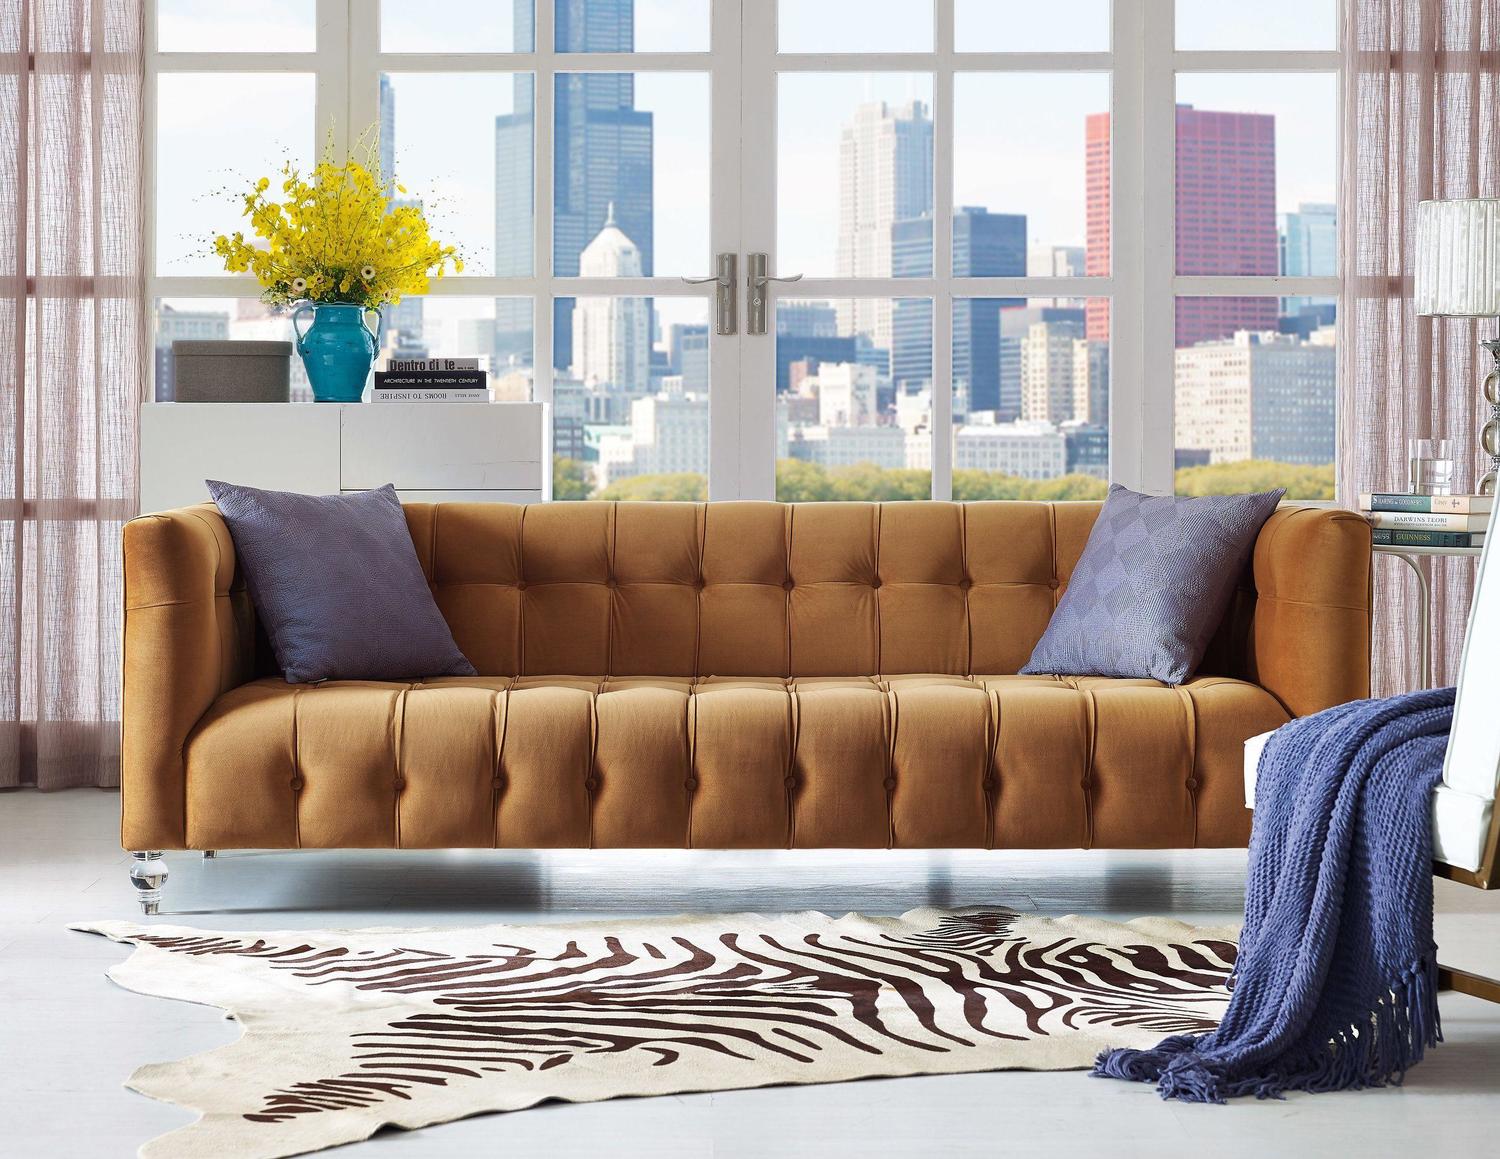 sectional couch turns into bed Tov Furniture Sofas Cognac